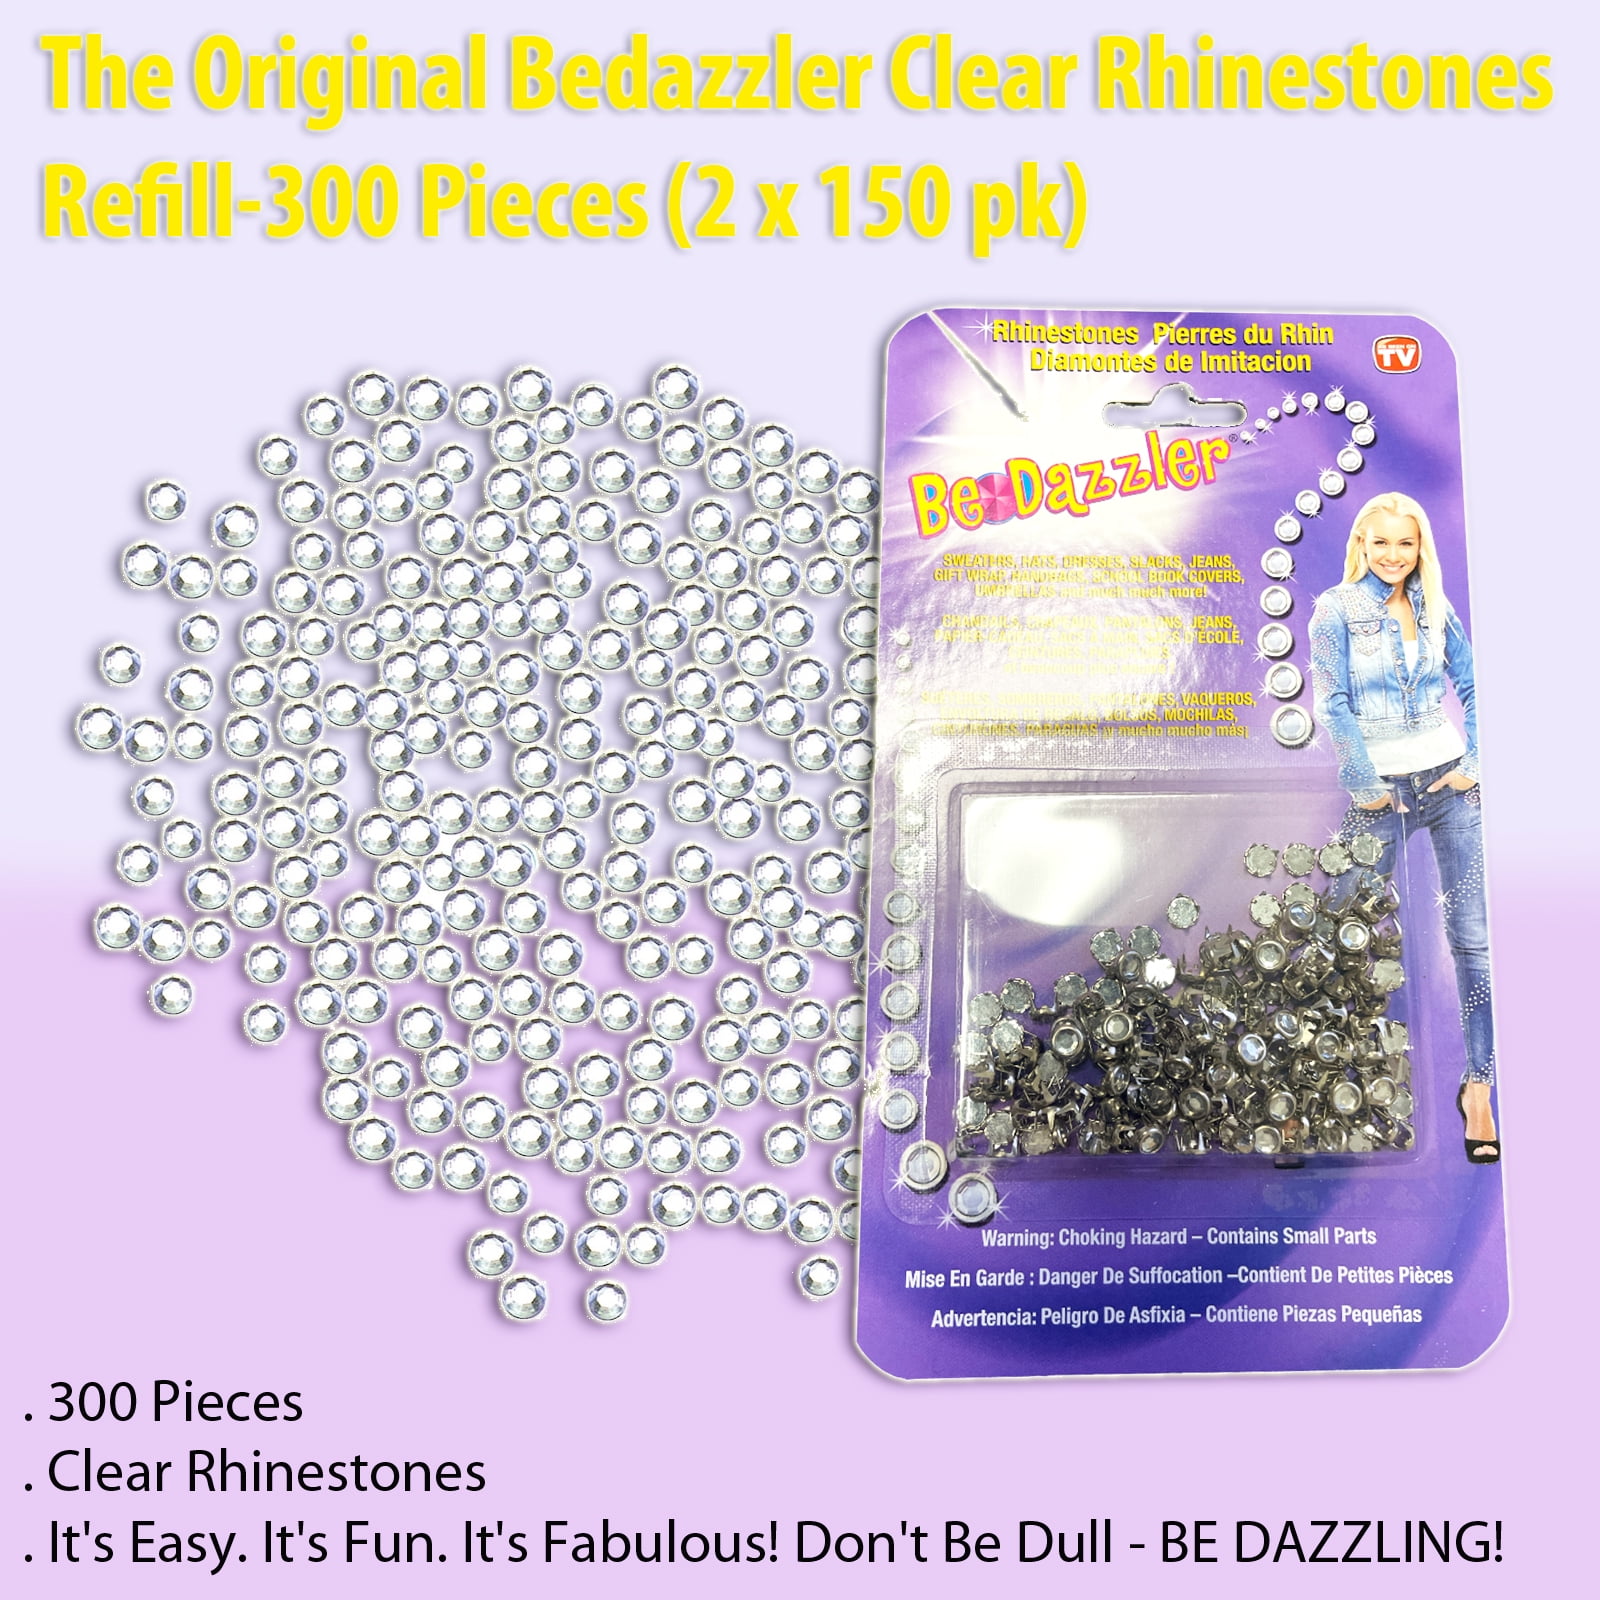 Allstarco Replacent Bedazzler Refills. 10 Colors. Size 30 Rhinestones  Studs. Over 450 Pieces.